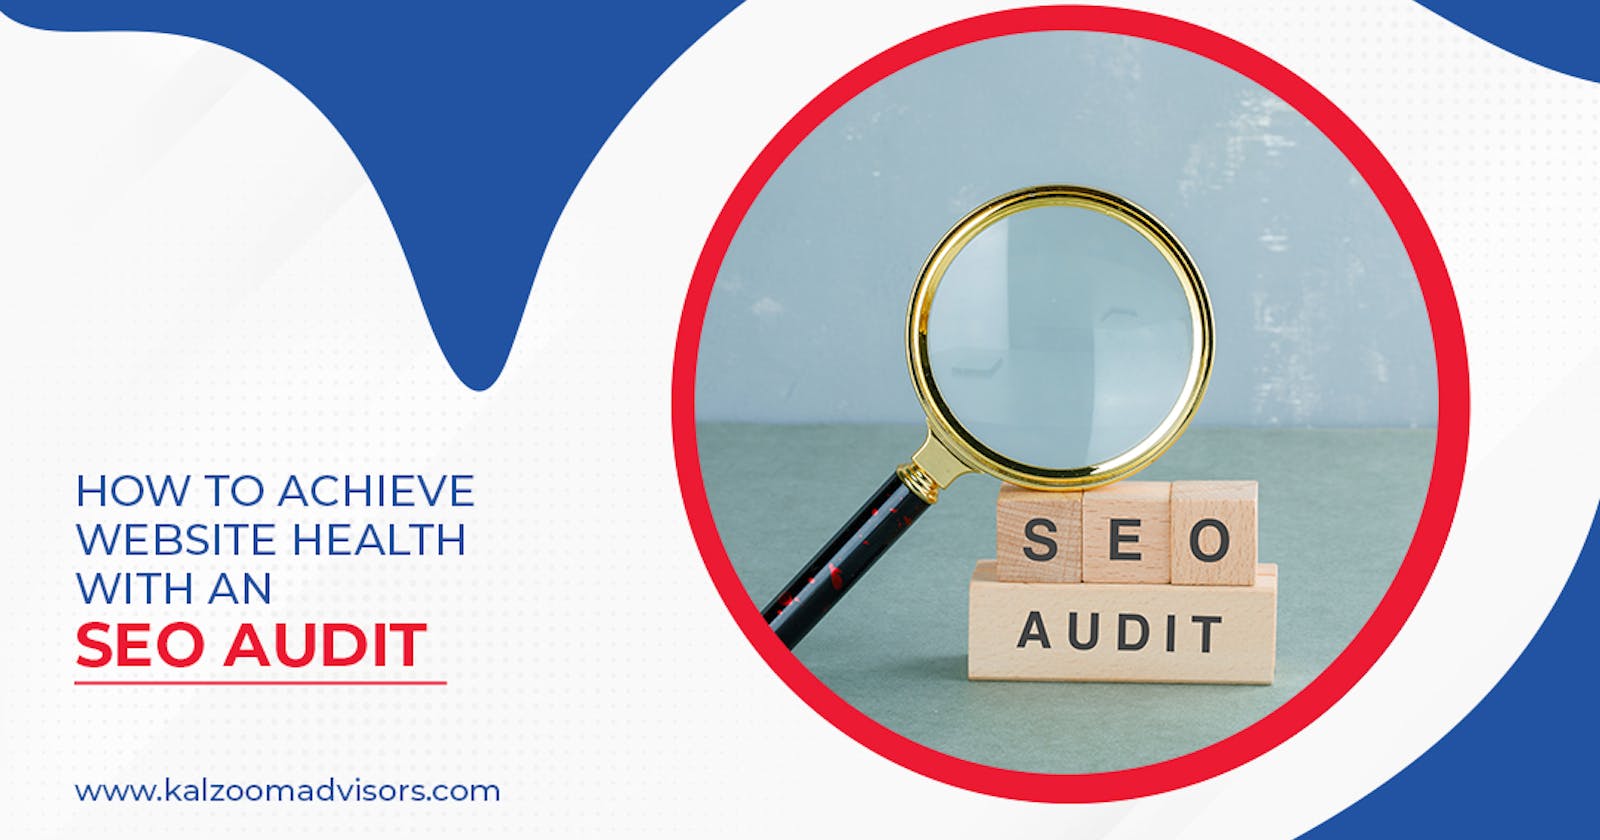 How to Achieve Website Health with an SEO Audit?